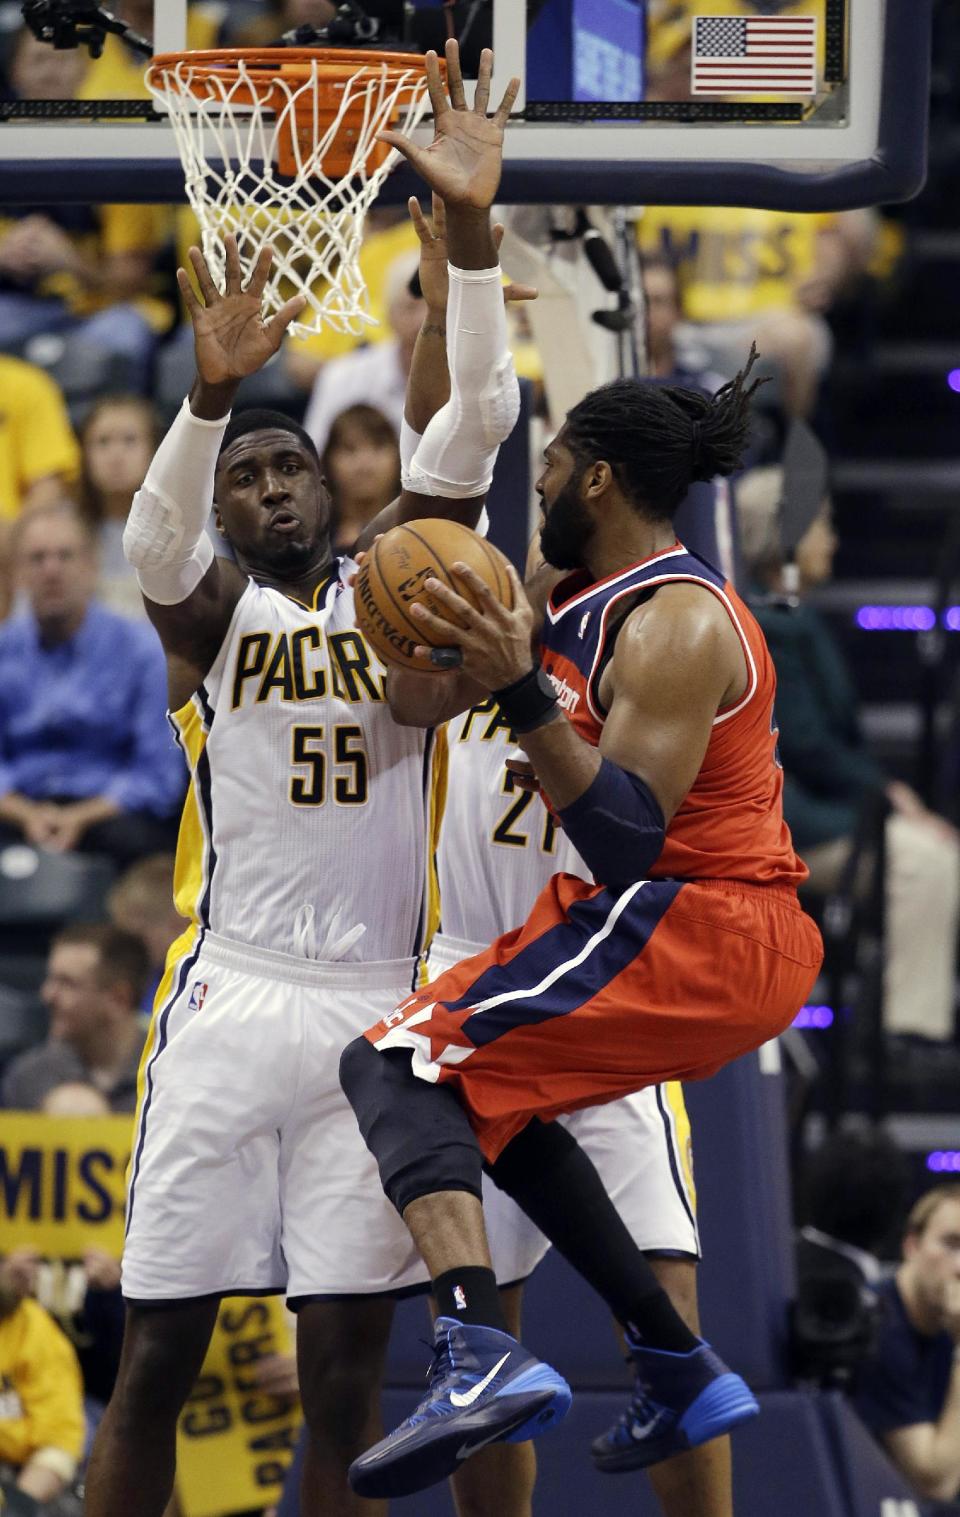 Washington Wizards' Nene Hilario, right, puts up a shot against Indiana Pacers' Roy Hibbert (55) and David West (21) during the second half of game 2 of the Eastern Conference semifinal NBA basketball playoff series Wednesday, May 7, 2014, in Indianapolis. Indiana won 86-82. (AP Photo/Darron Cummings)